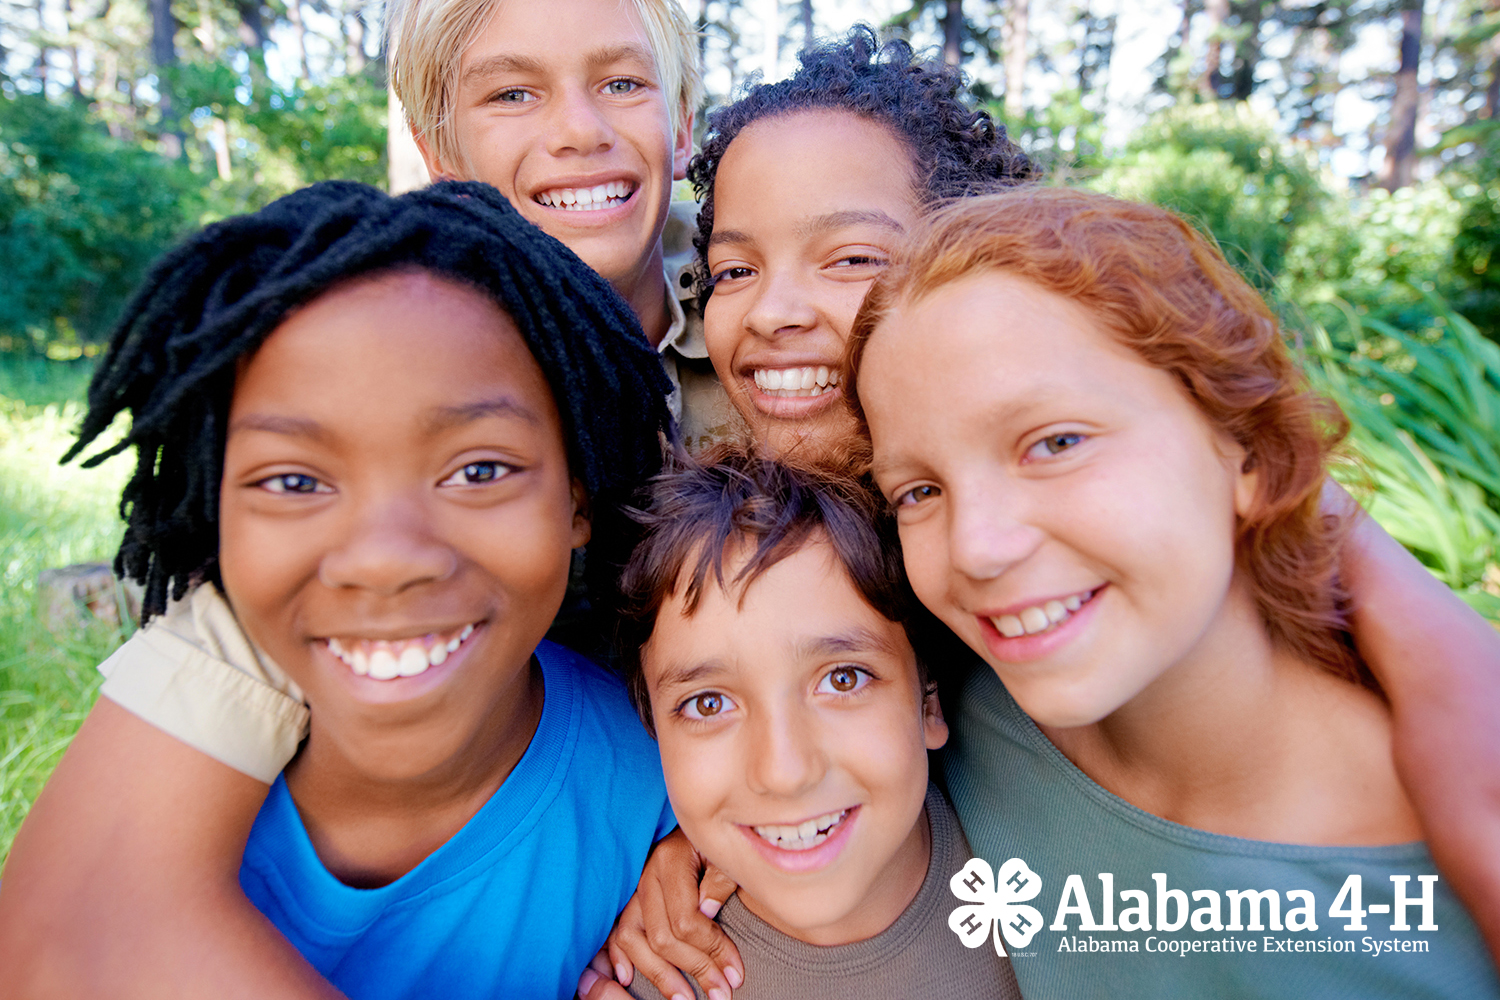 group of 4-H members together outdoors; Alabama 4-H